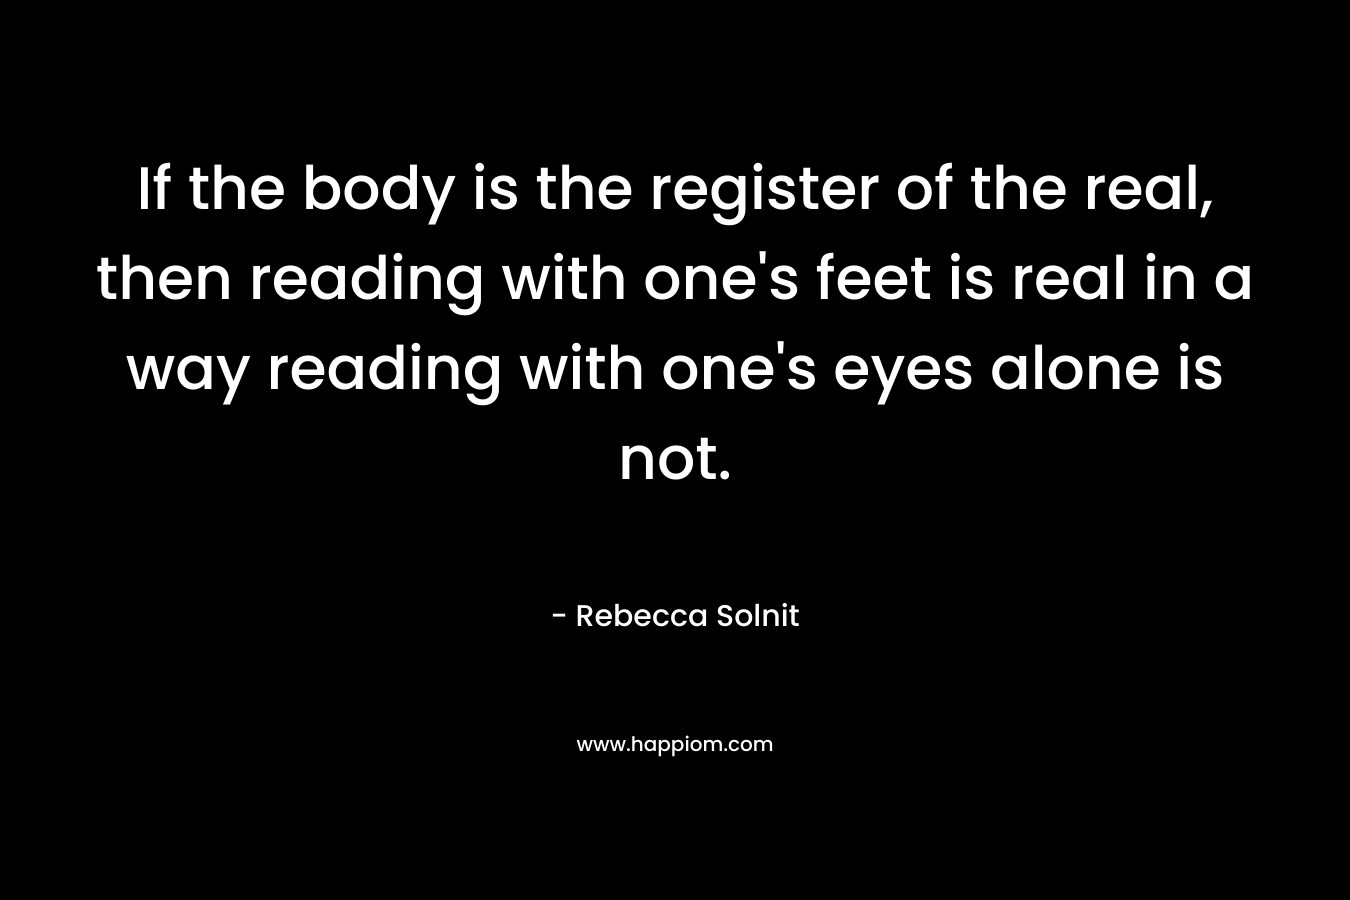 If the body is the register of the real, then reading with one's feet is real in a way reading with one's eyes alone is not.